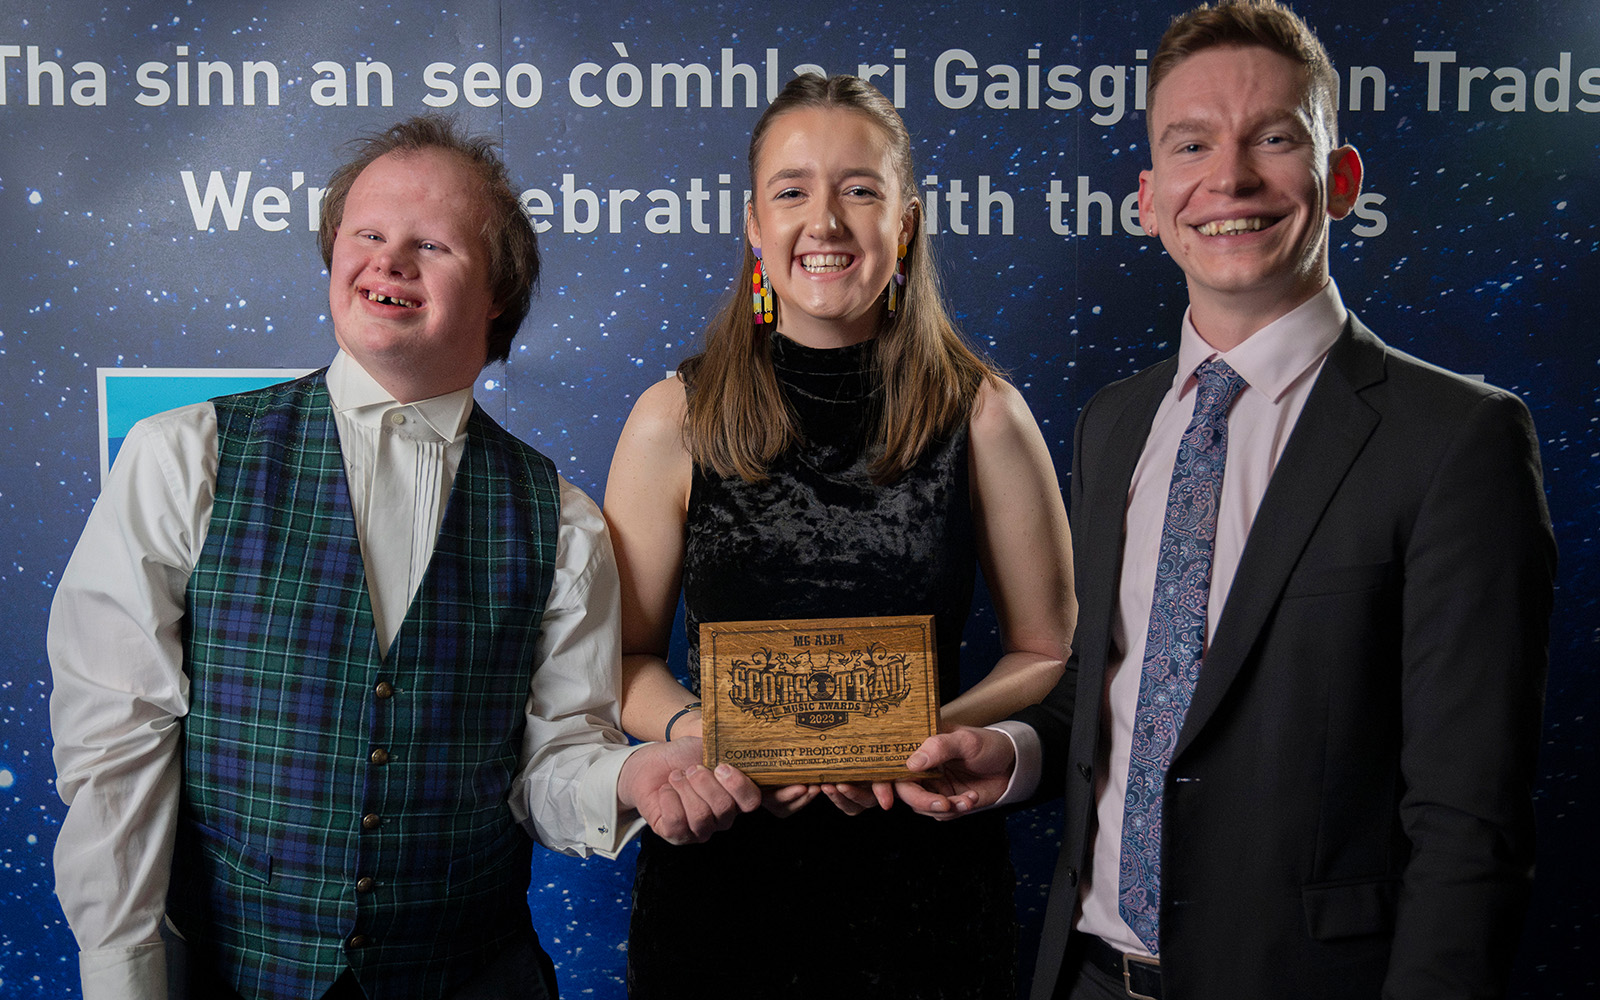 Magnus Turpie (L), Freya Taylor (middle) and Christian Gamauf (R) of Fèis Rois Ceilidh Trail accept the award for Community Project of the Year